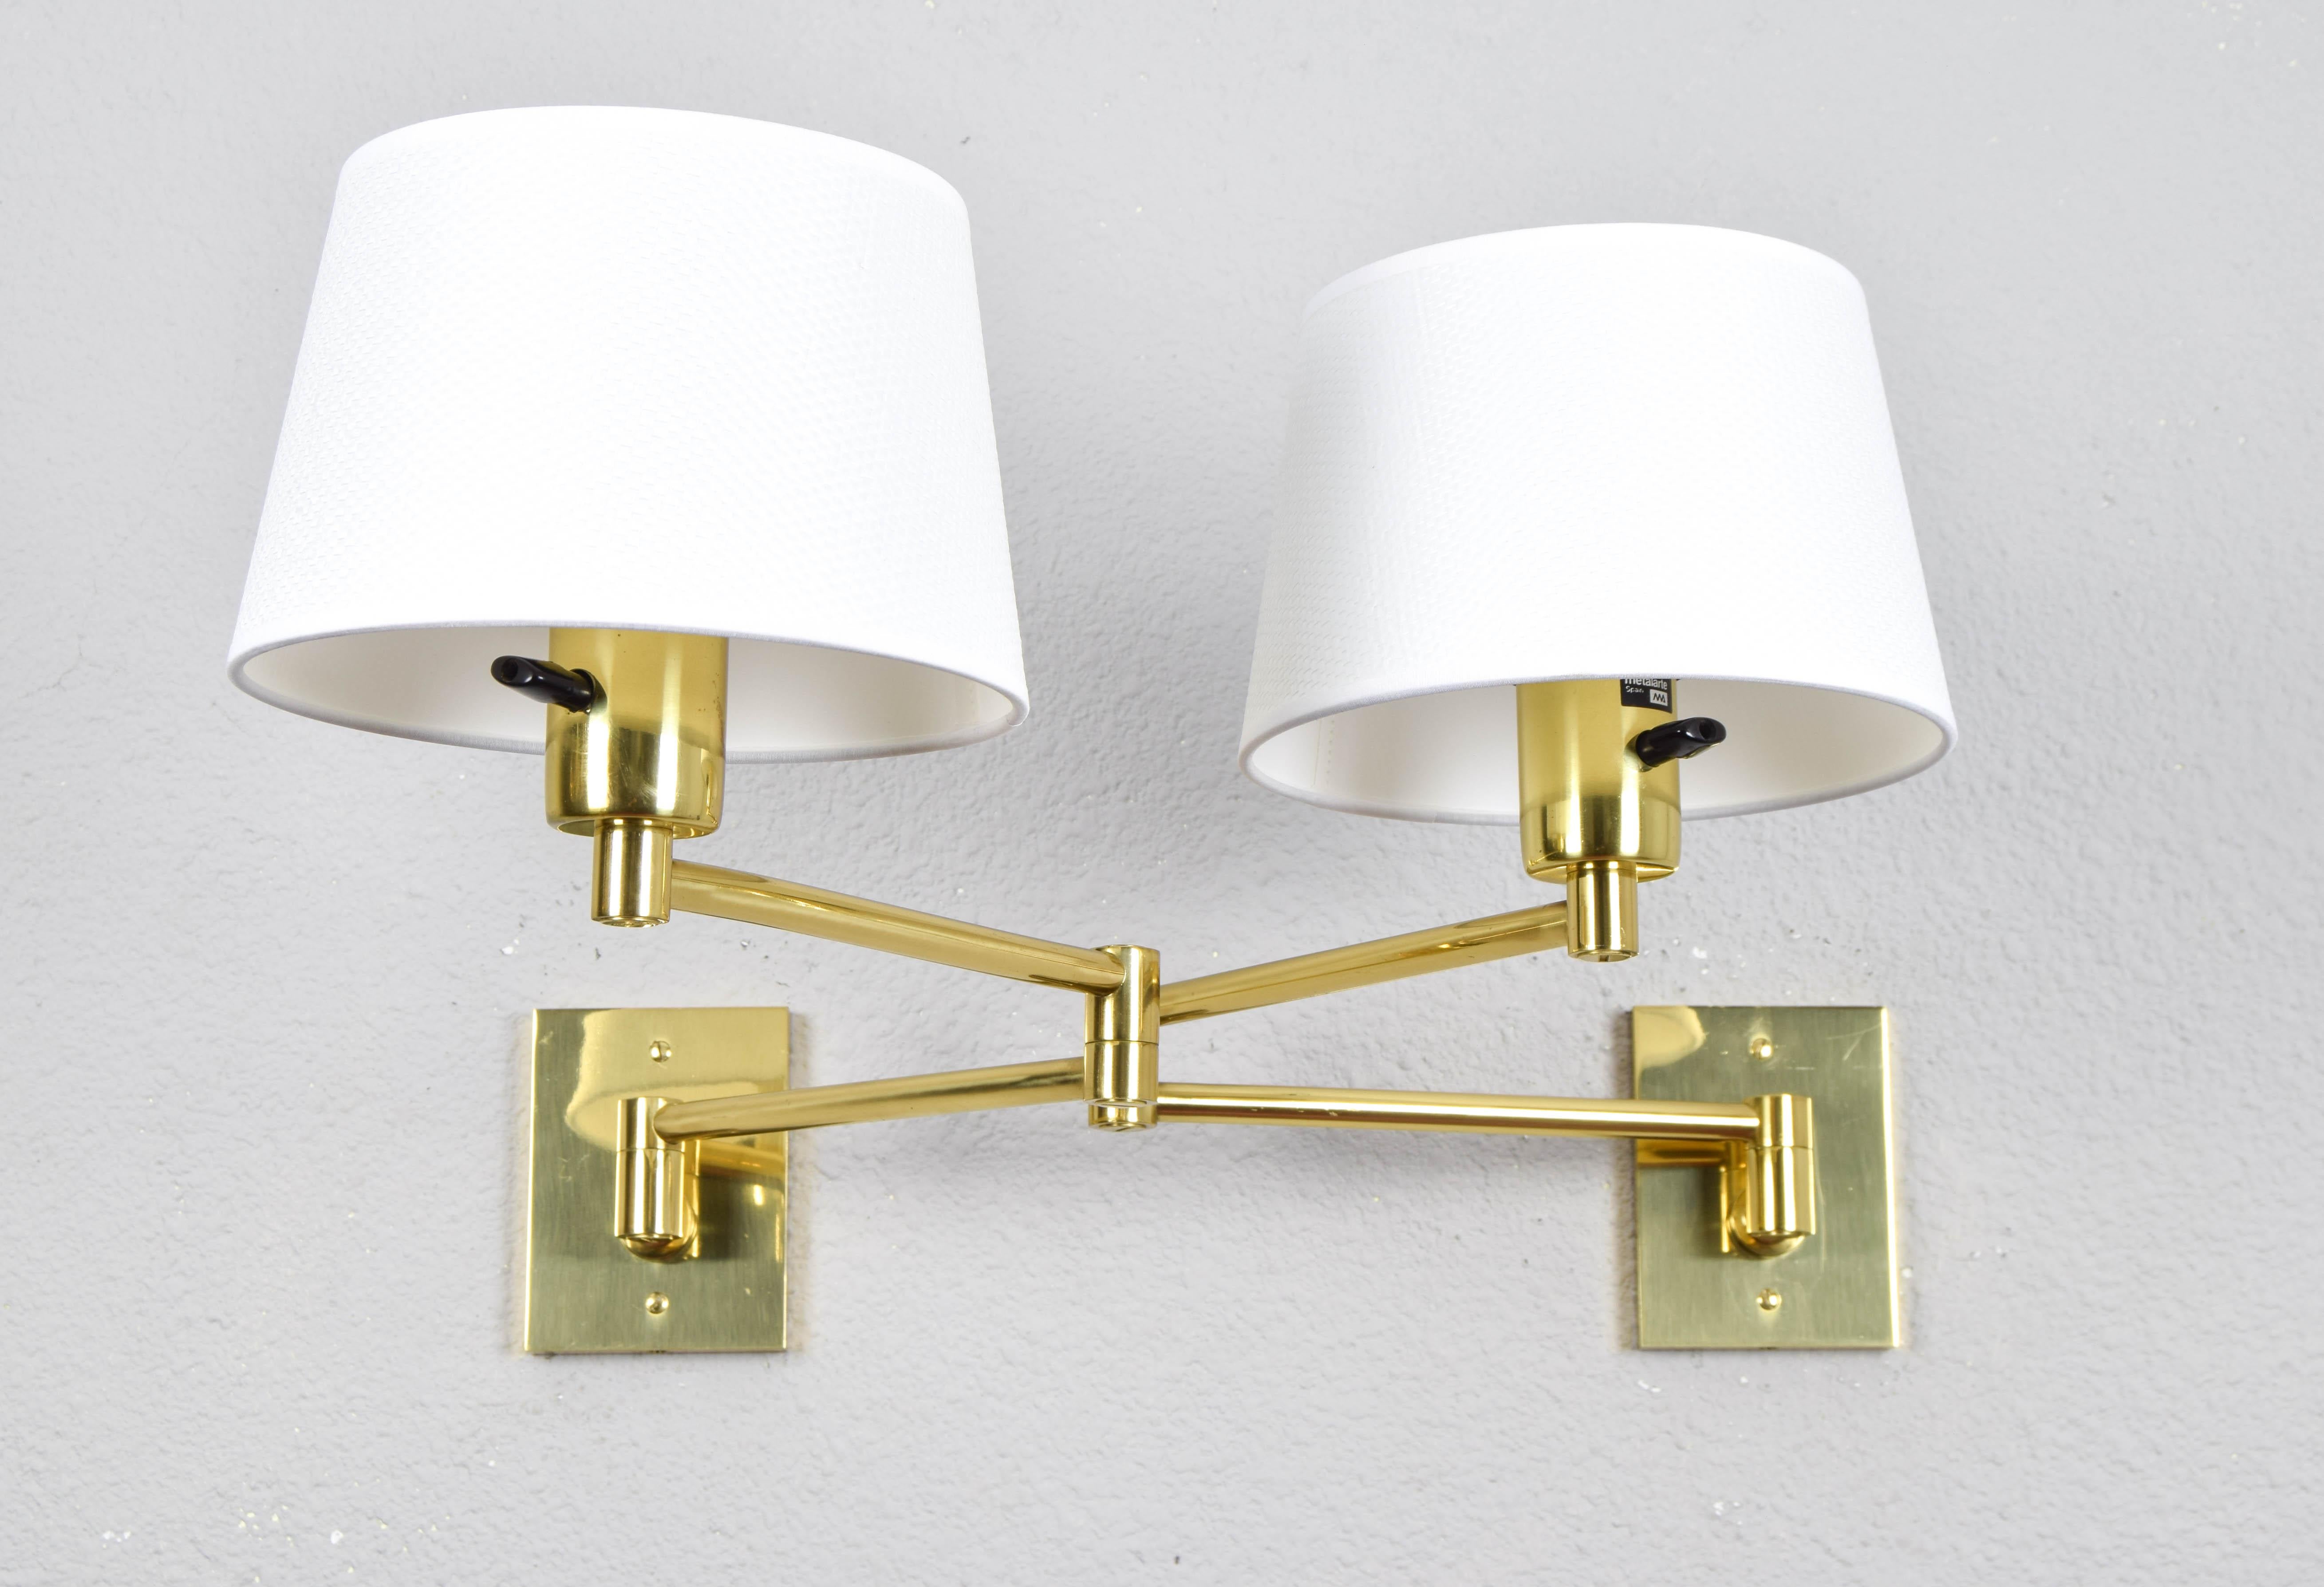  Two Mid-Century Modern Swing Arm Brass Sconces by George W Hansen for Metalarte 1